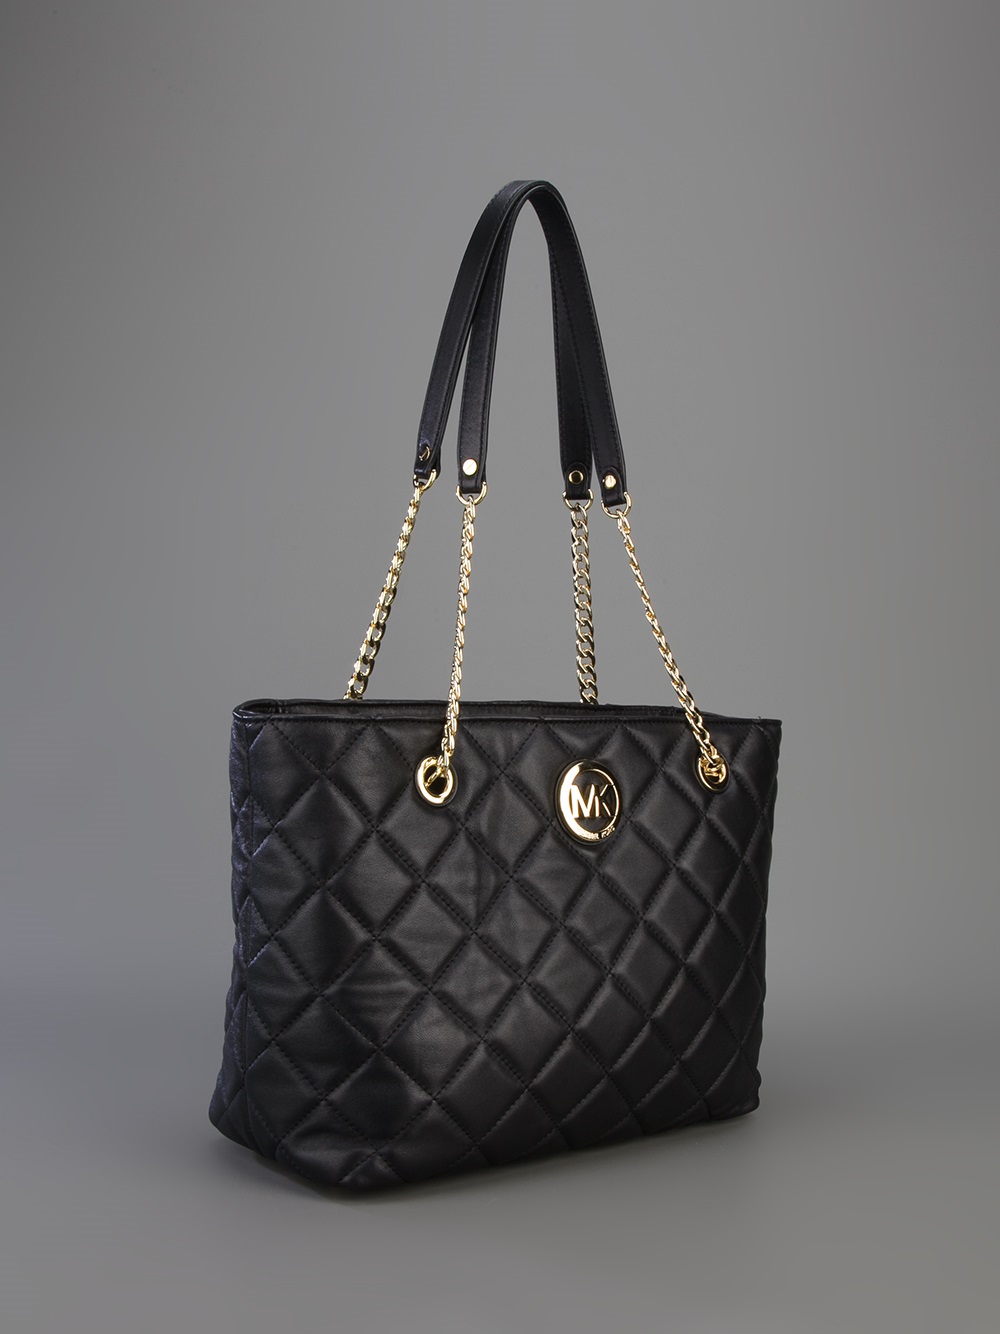 MICHAEL Michael Kors Fulton Large Quilted Tote in Black - Lyst